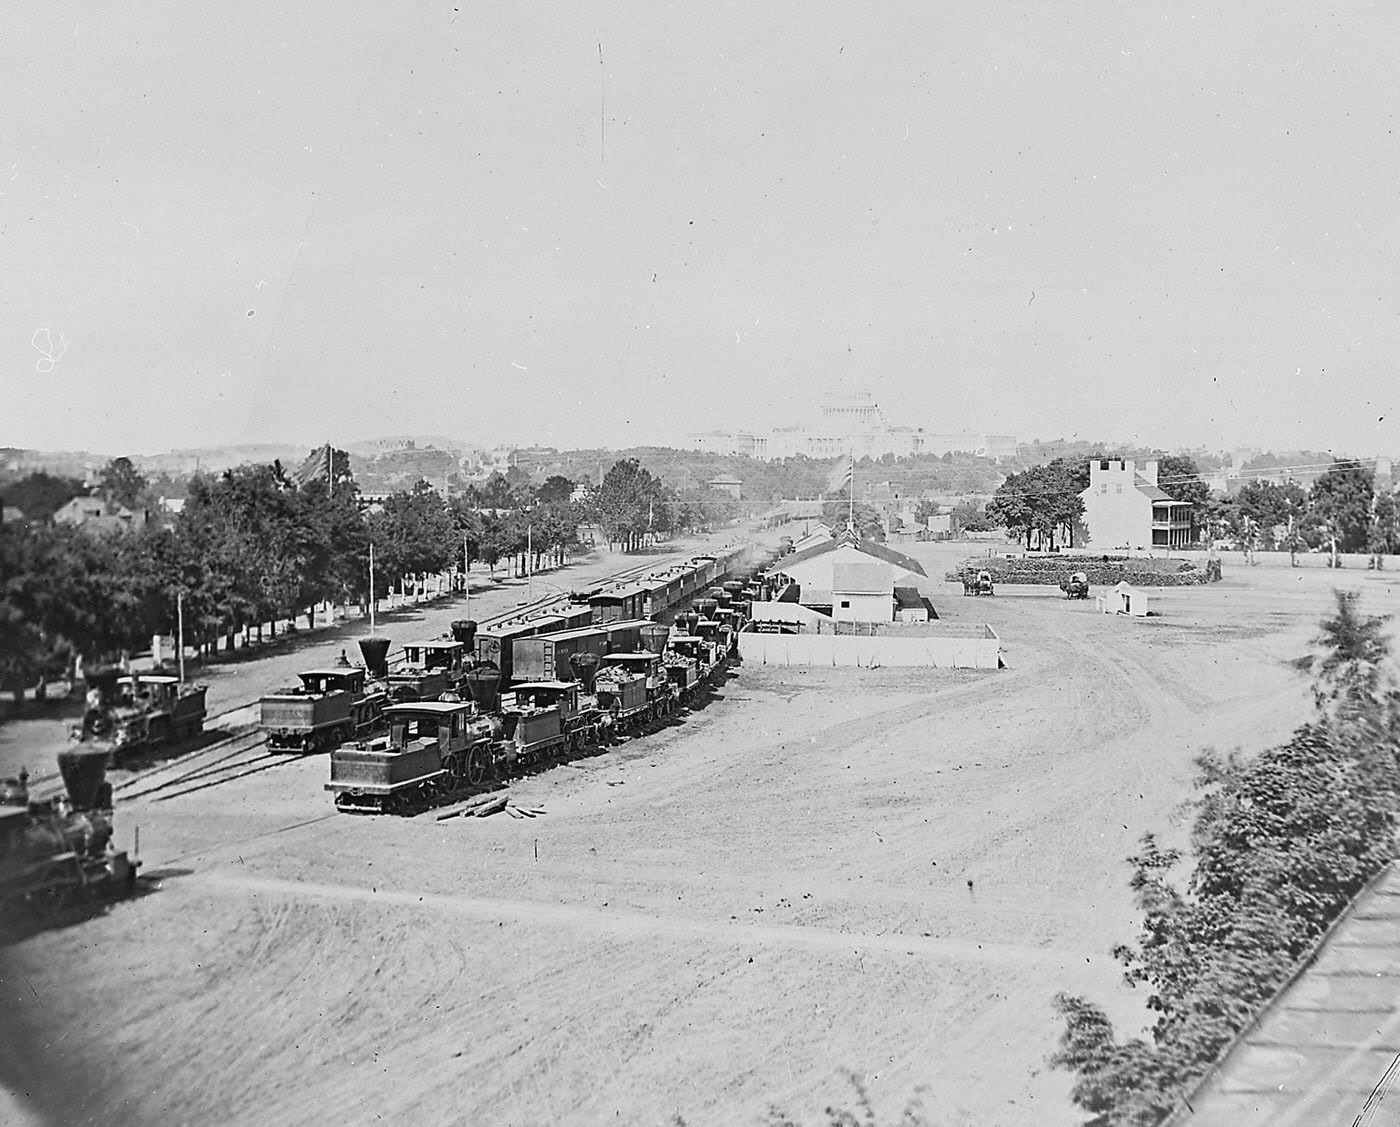 View of trains in the Maryland Avenue depot, Washington DC, 1860s.